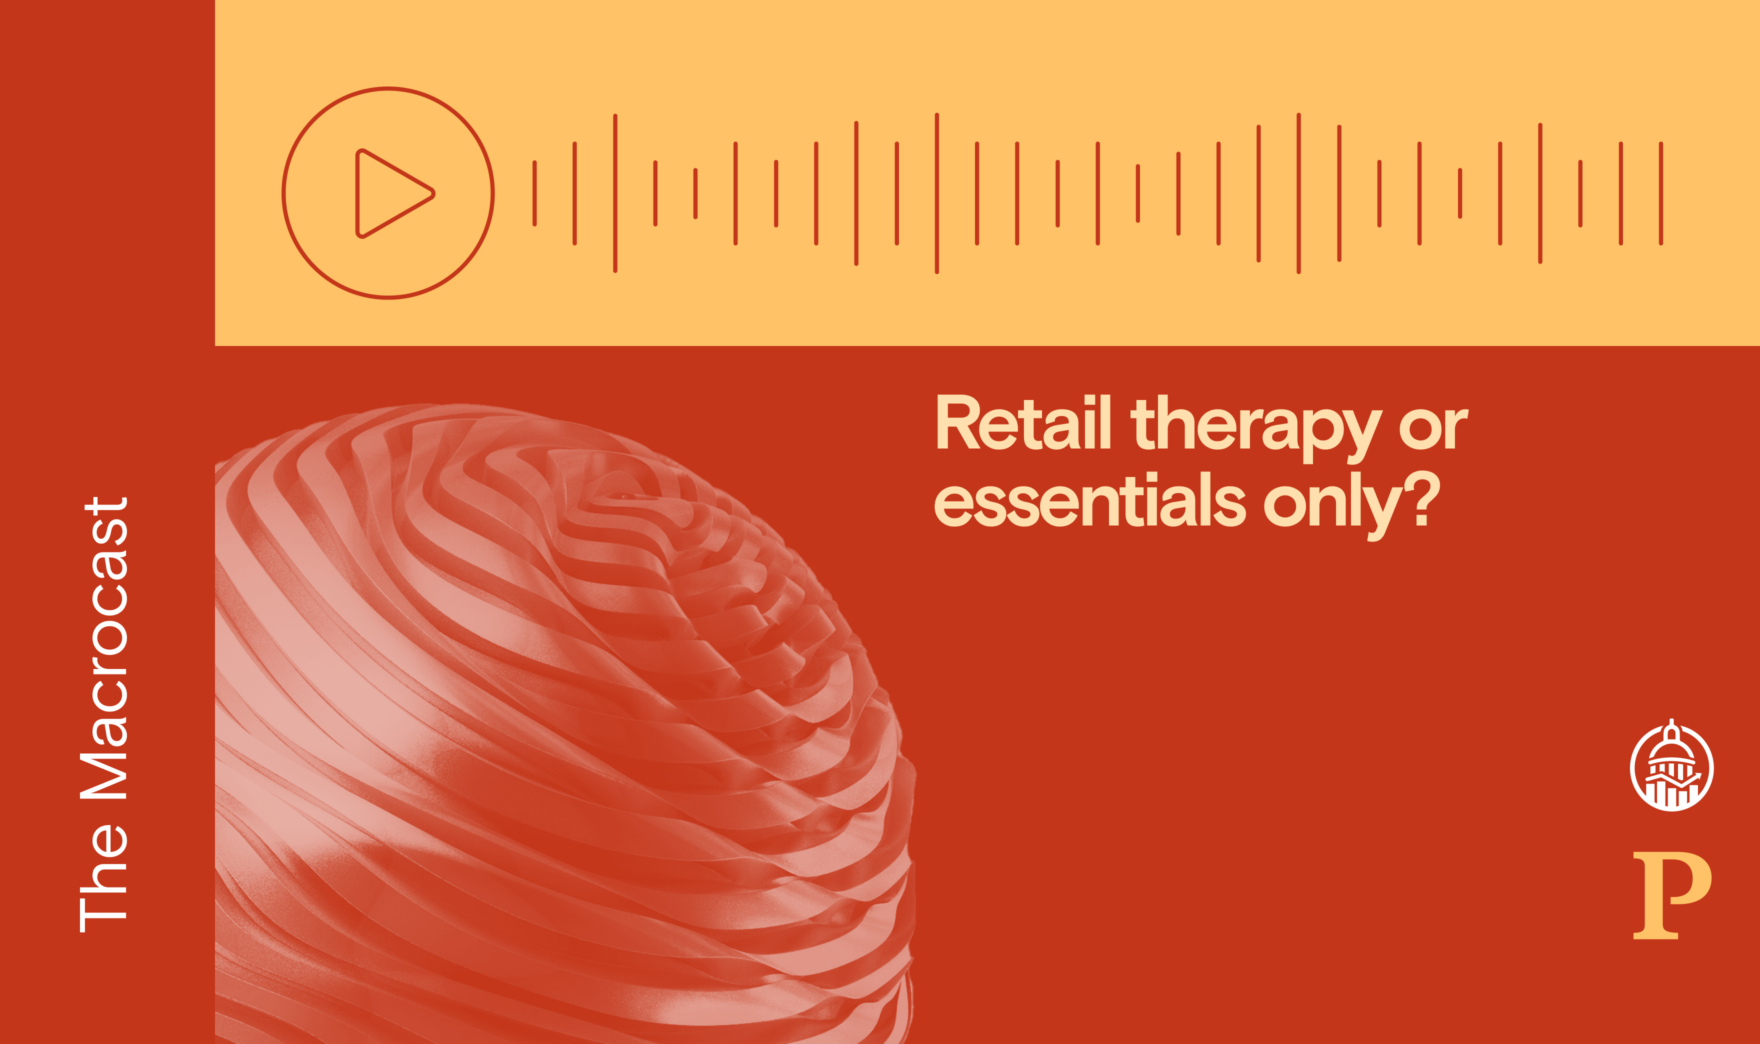 Macrocast: Retail therapy or essentials only?